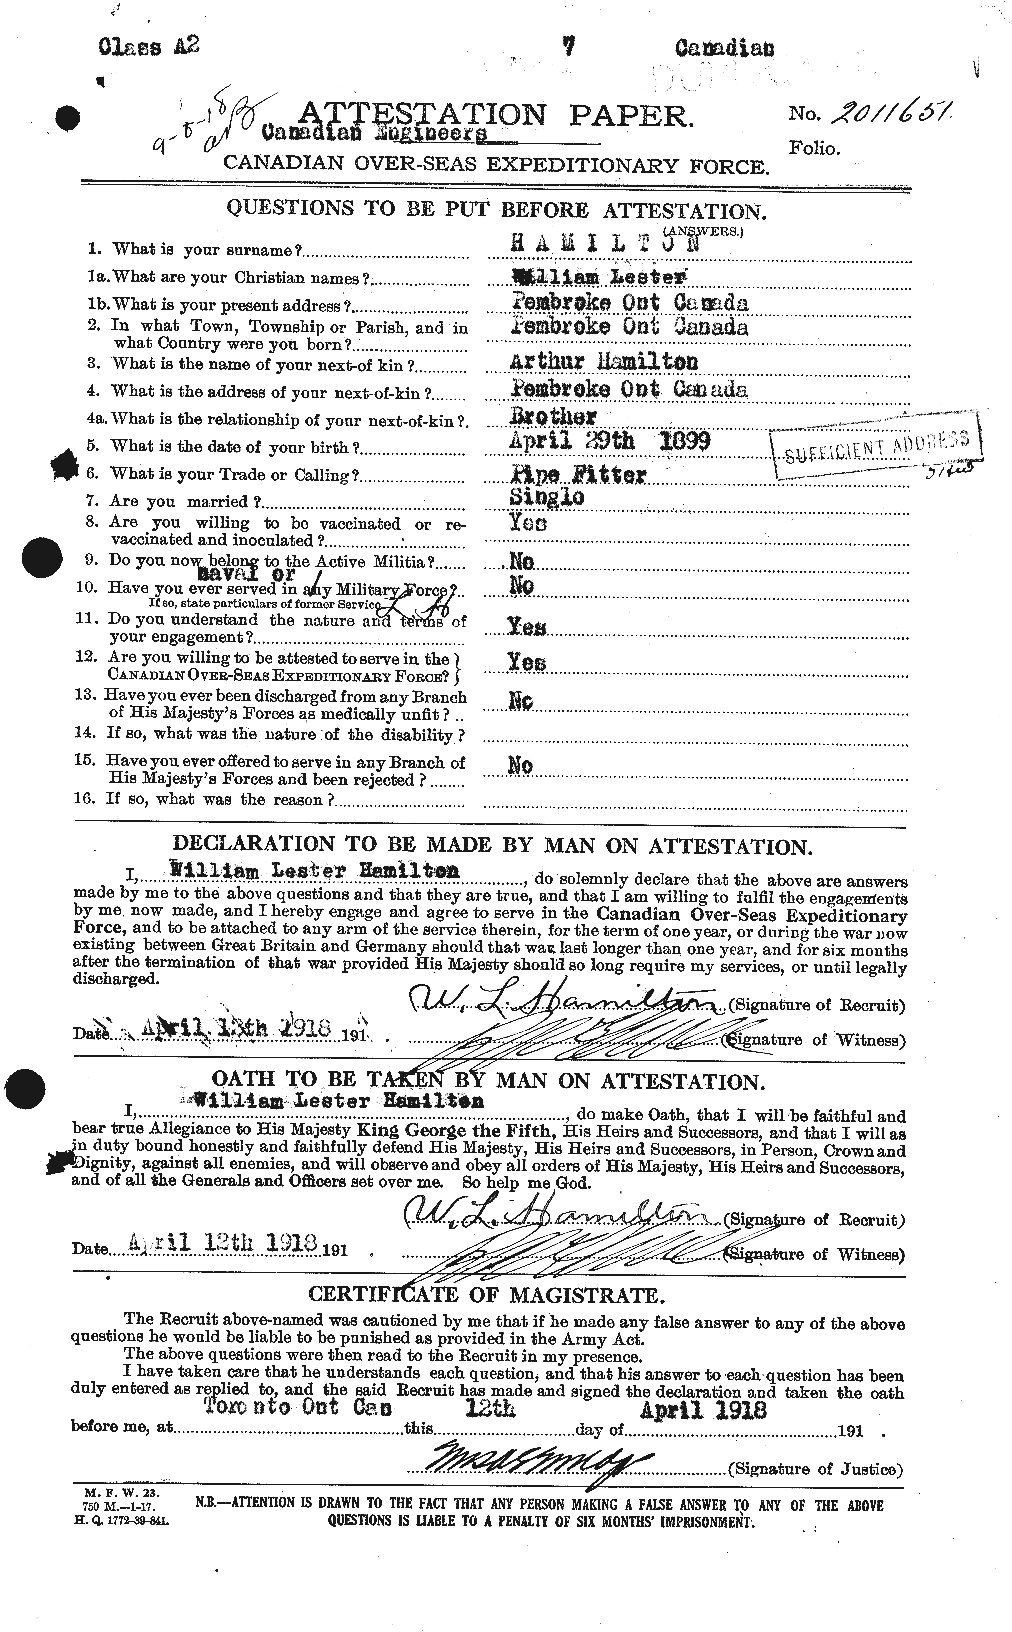 Personnel Records of the First World War - CEF 374914a